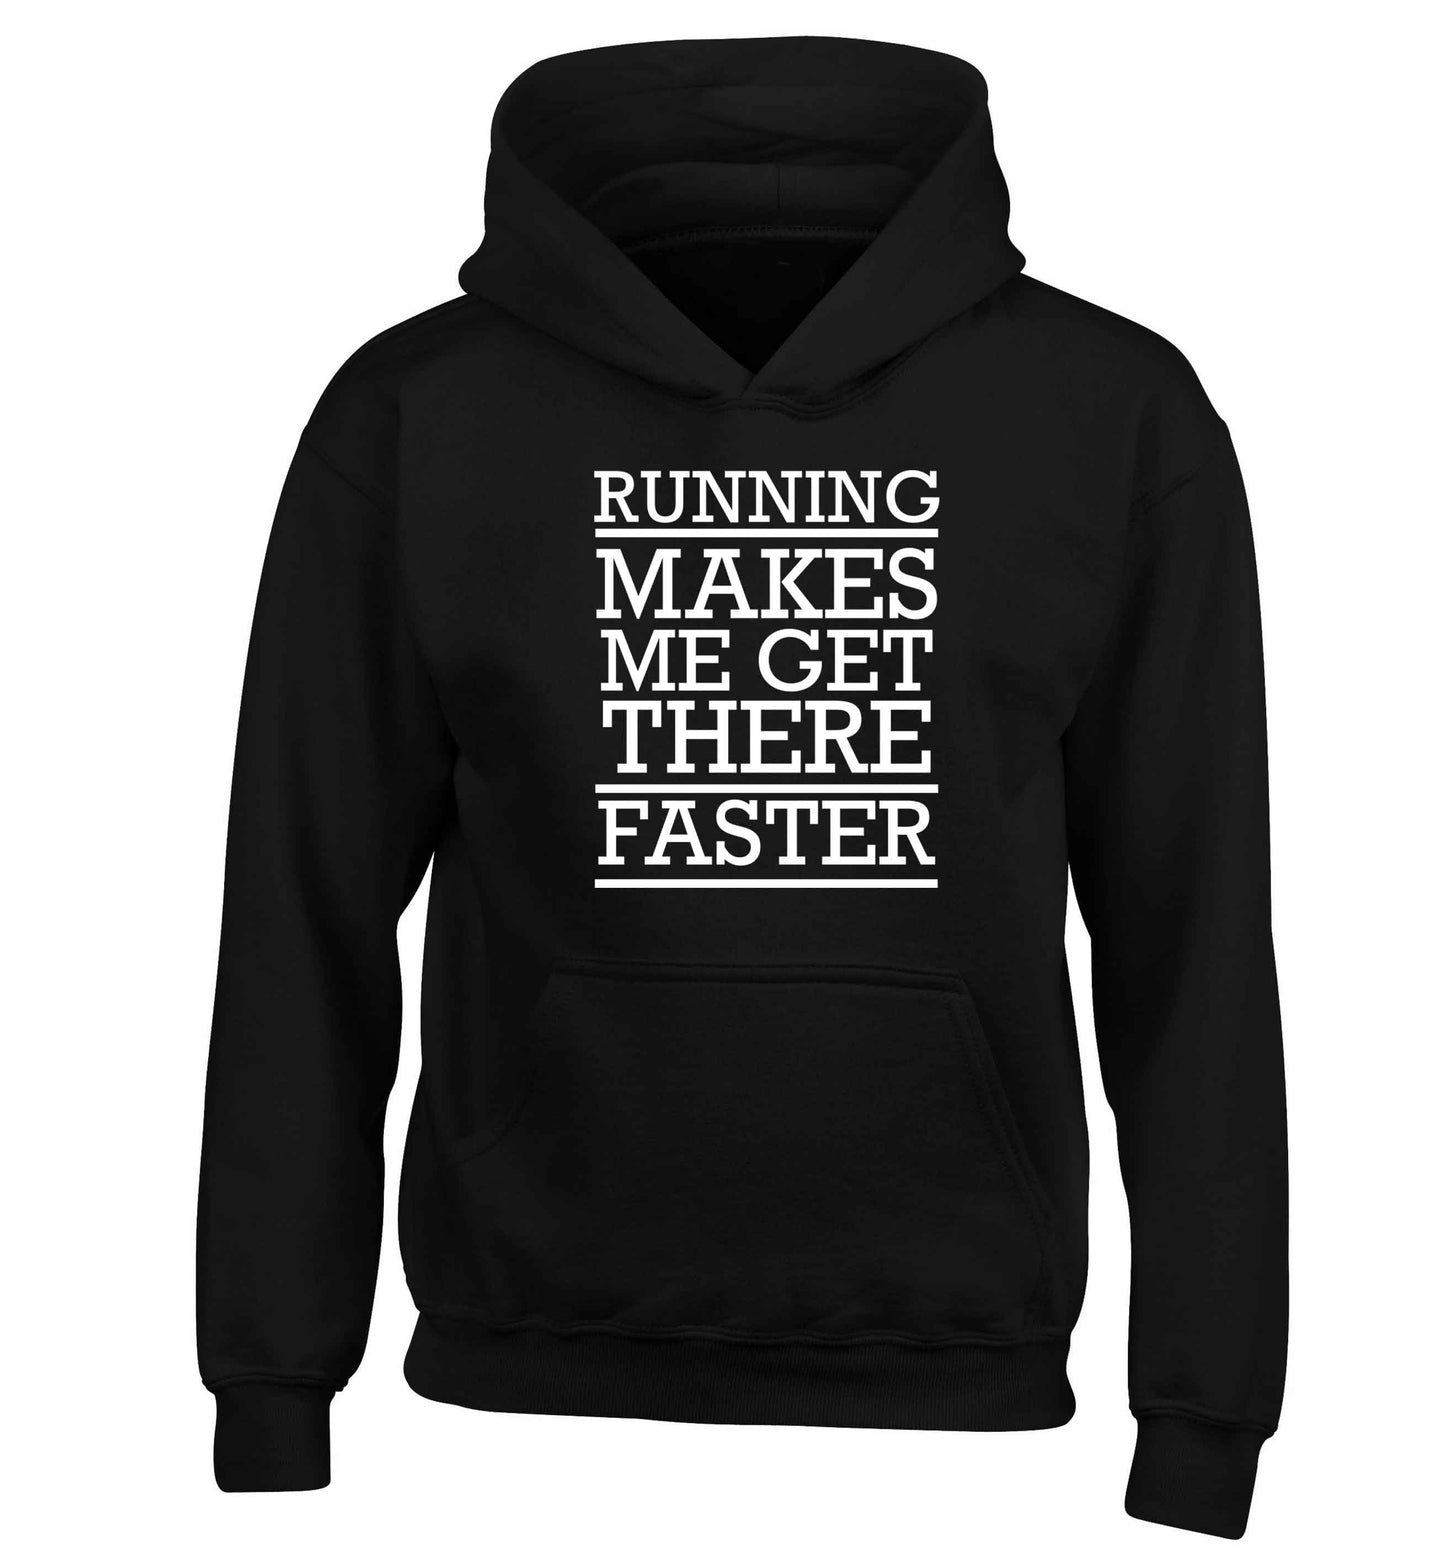 Running makes me get there faster children's black hoodie 12-13 Years